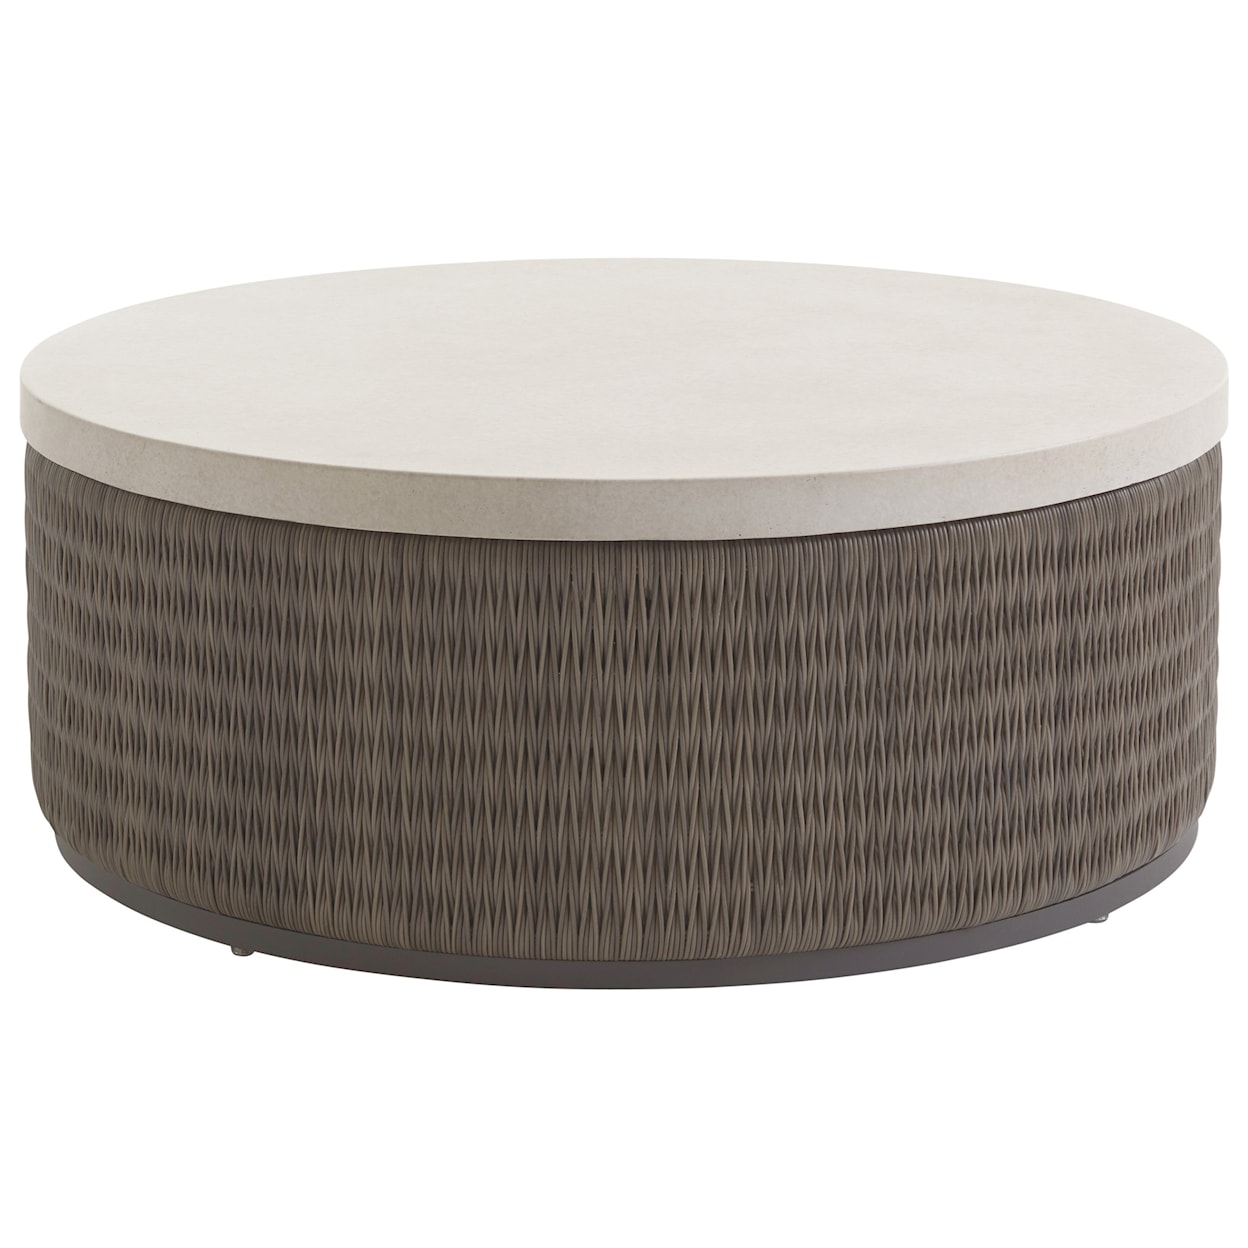 Tommy Bahama Outdoor Living Cypress Point Ocean Terrace Round Cocktail Table w/ Weatherstone Top